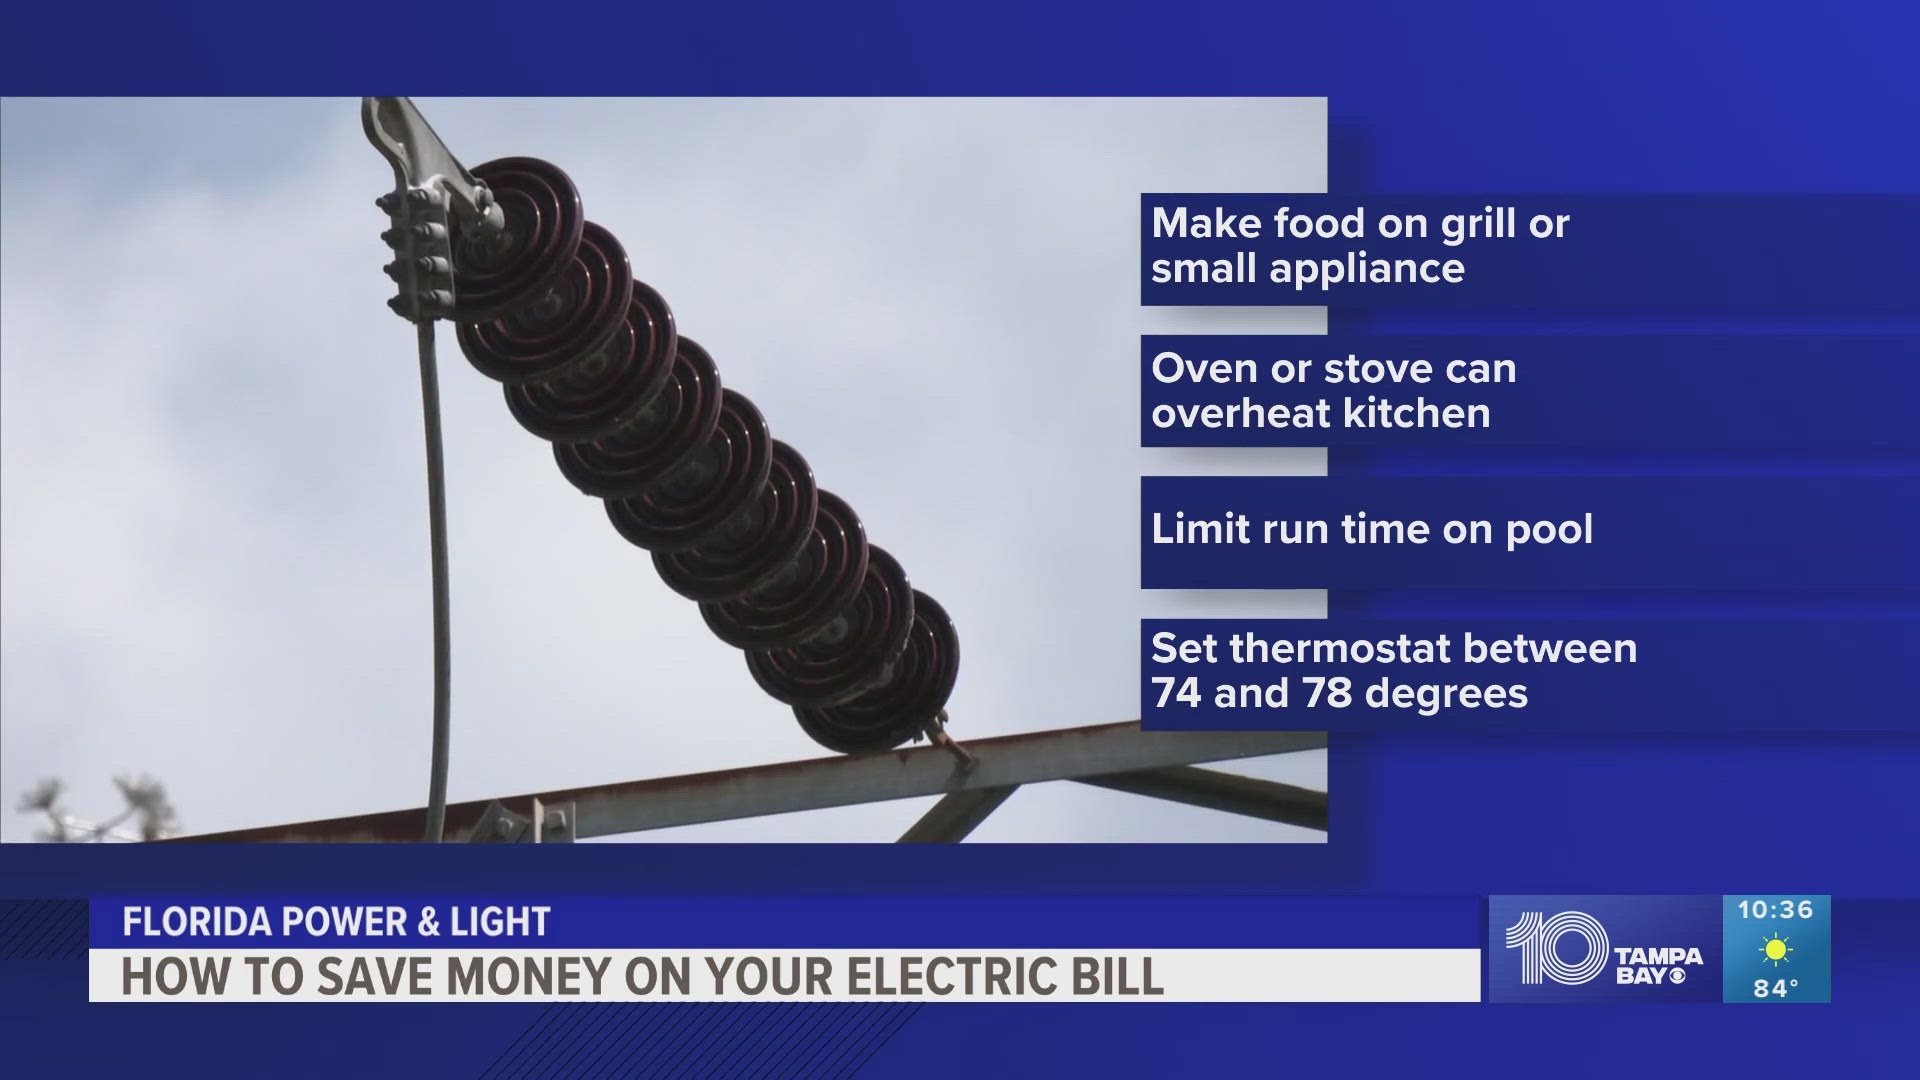 Florida Power and Light shares some advice to help you save on electric during this summer.